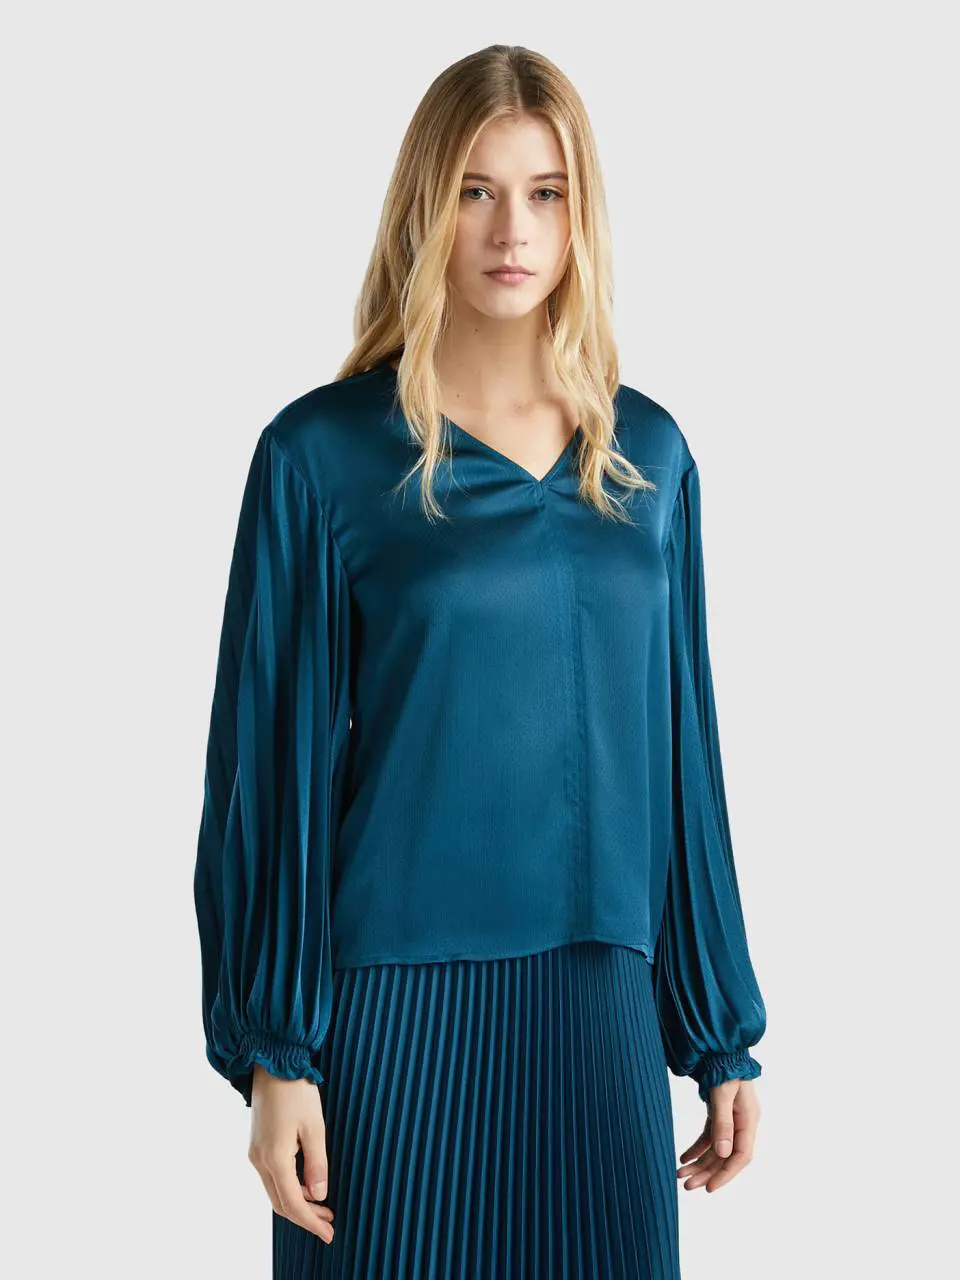 Benetton blouse with long pleated sleeves. 1